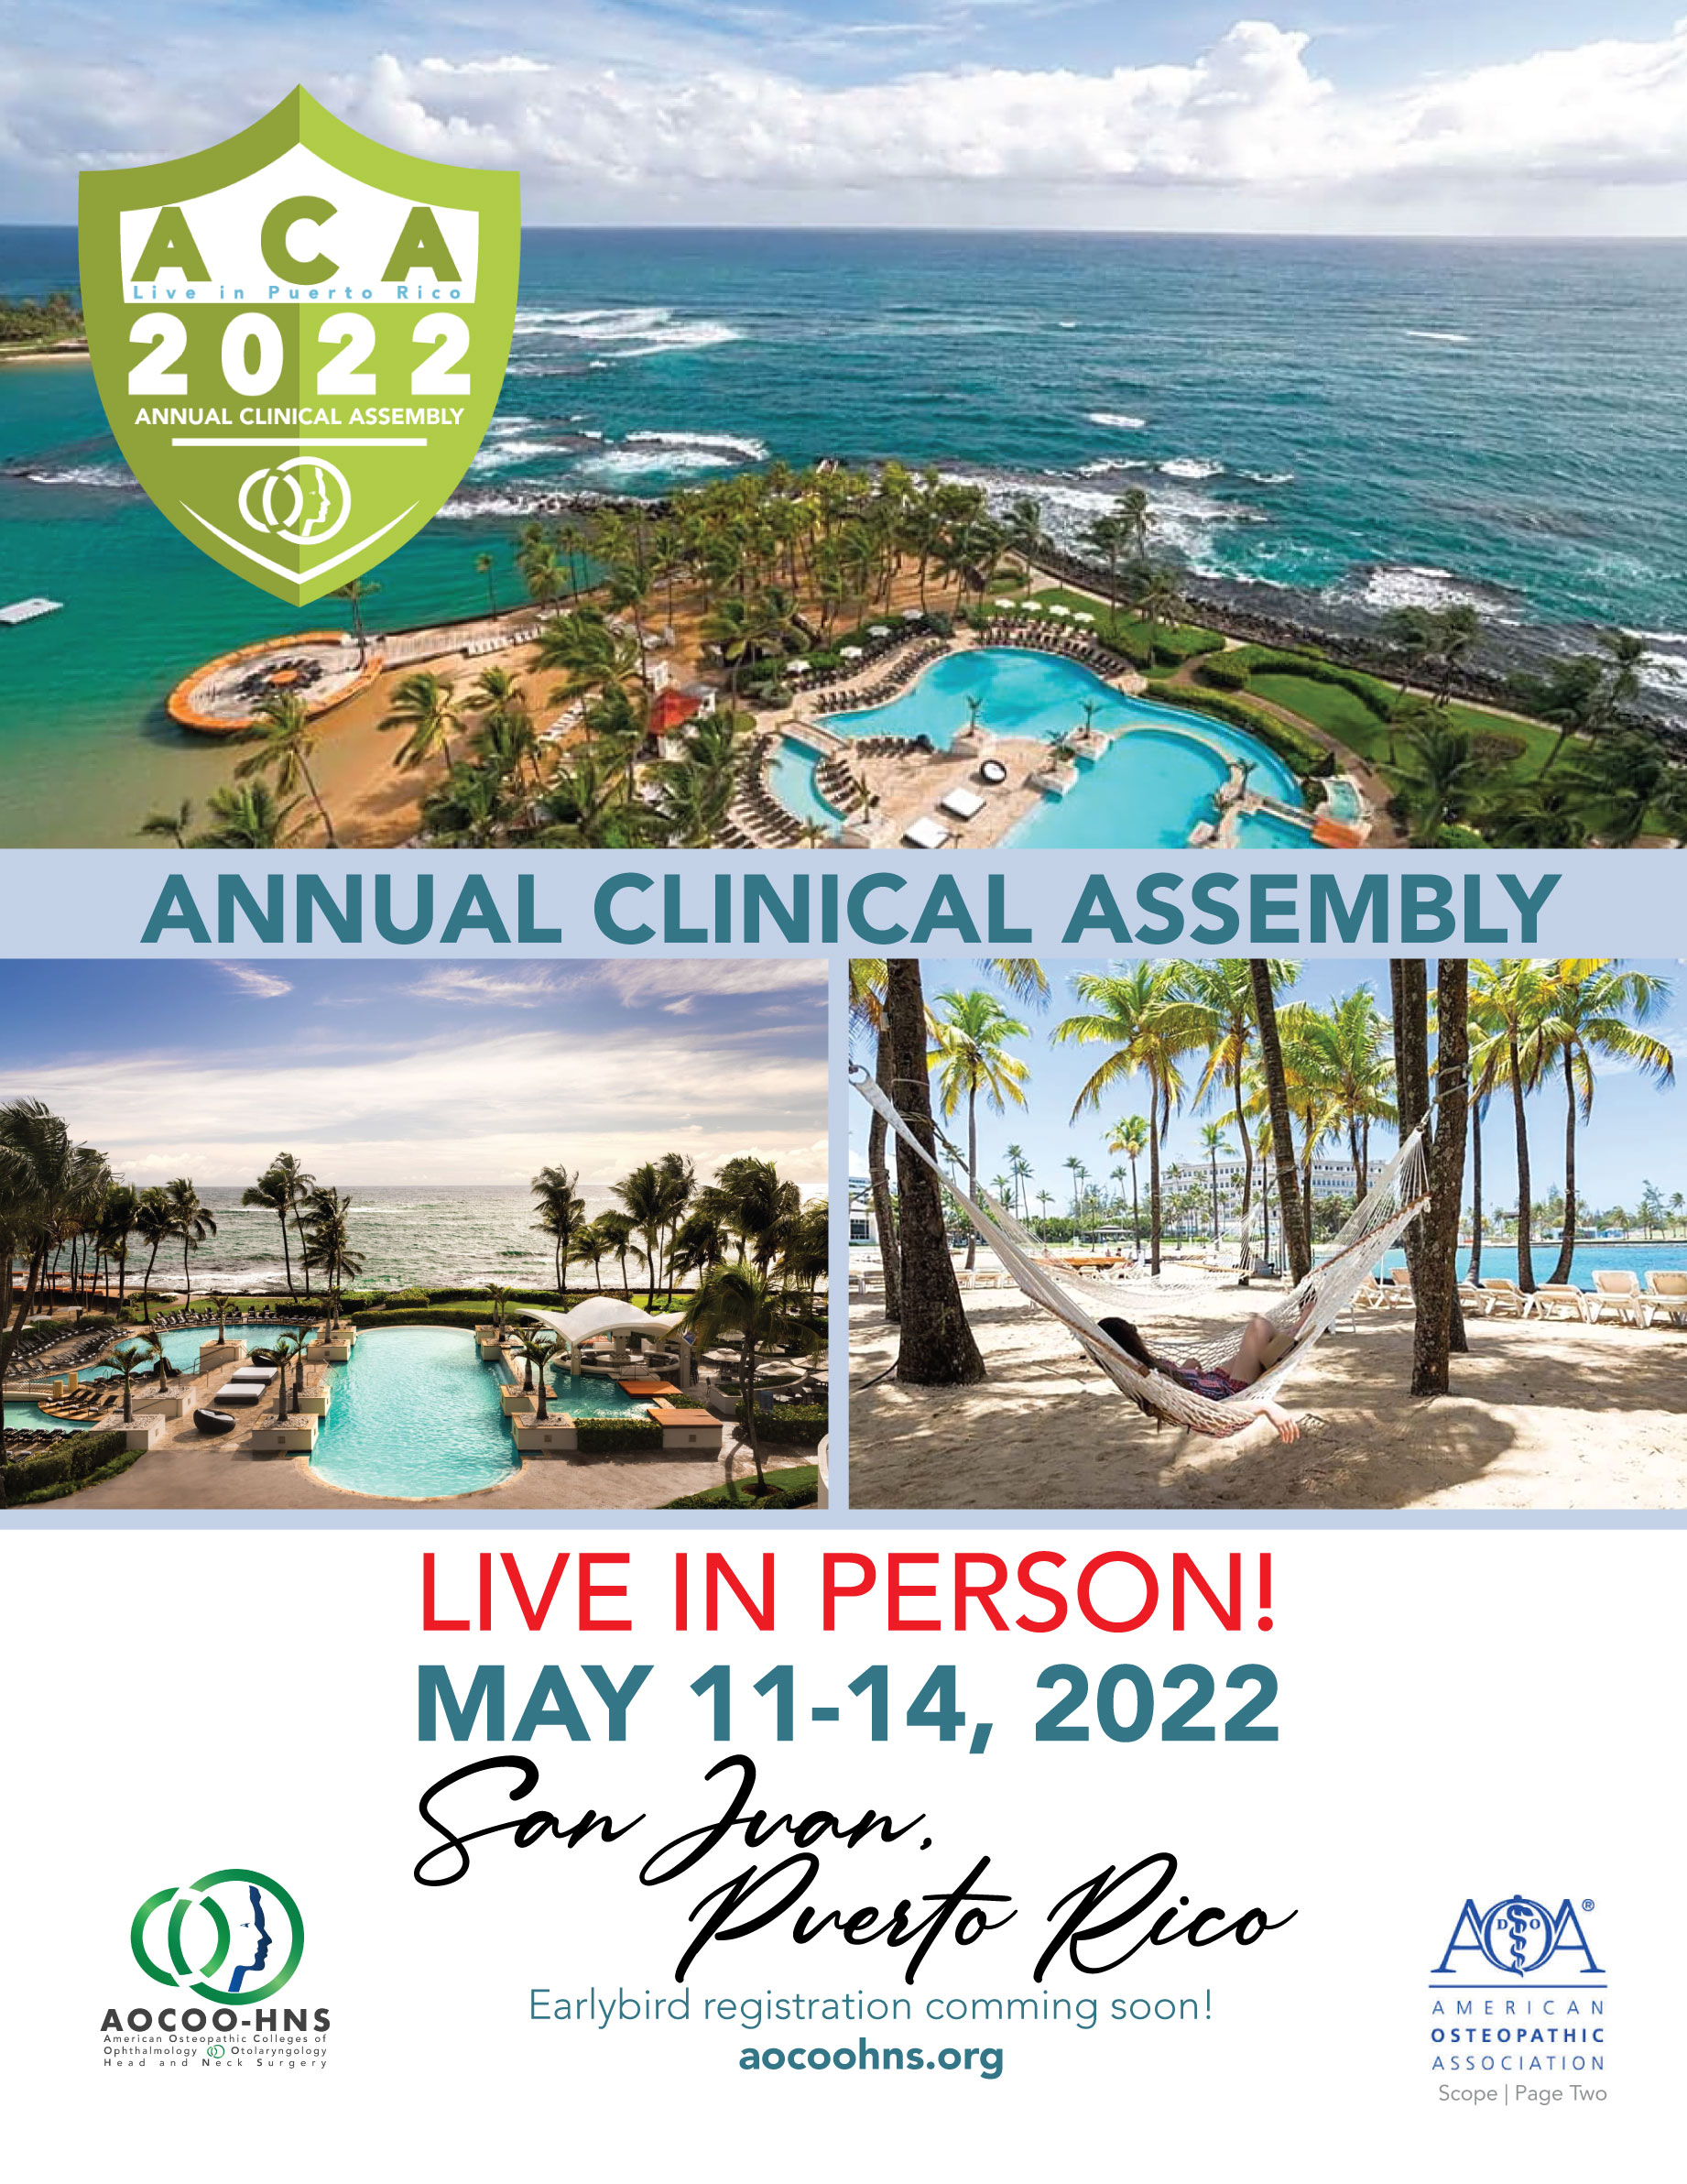 2022 Annual Clinical Assembly Image